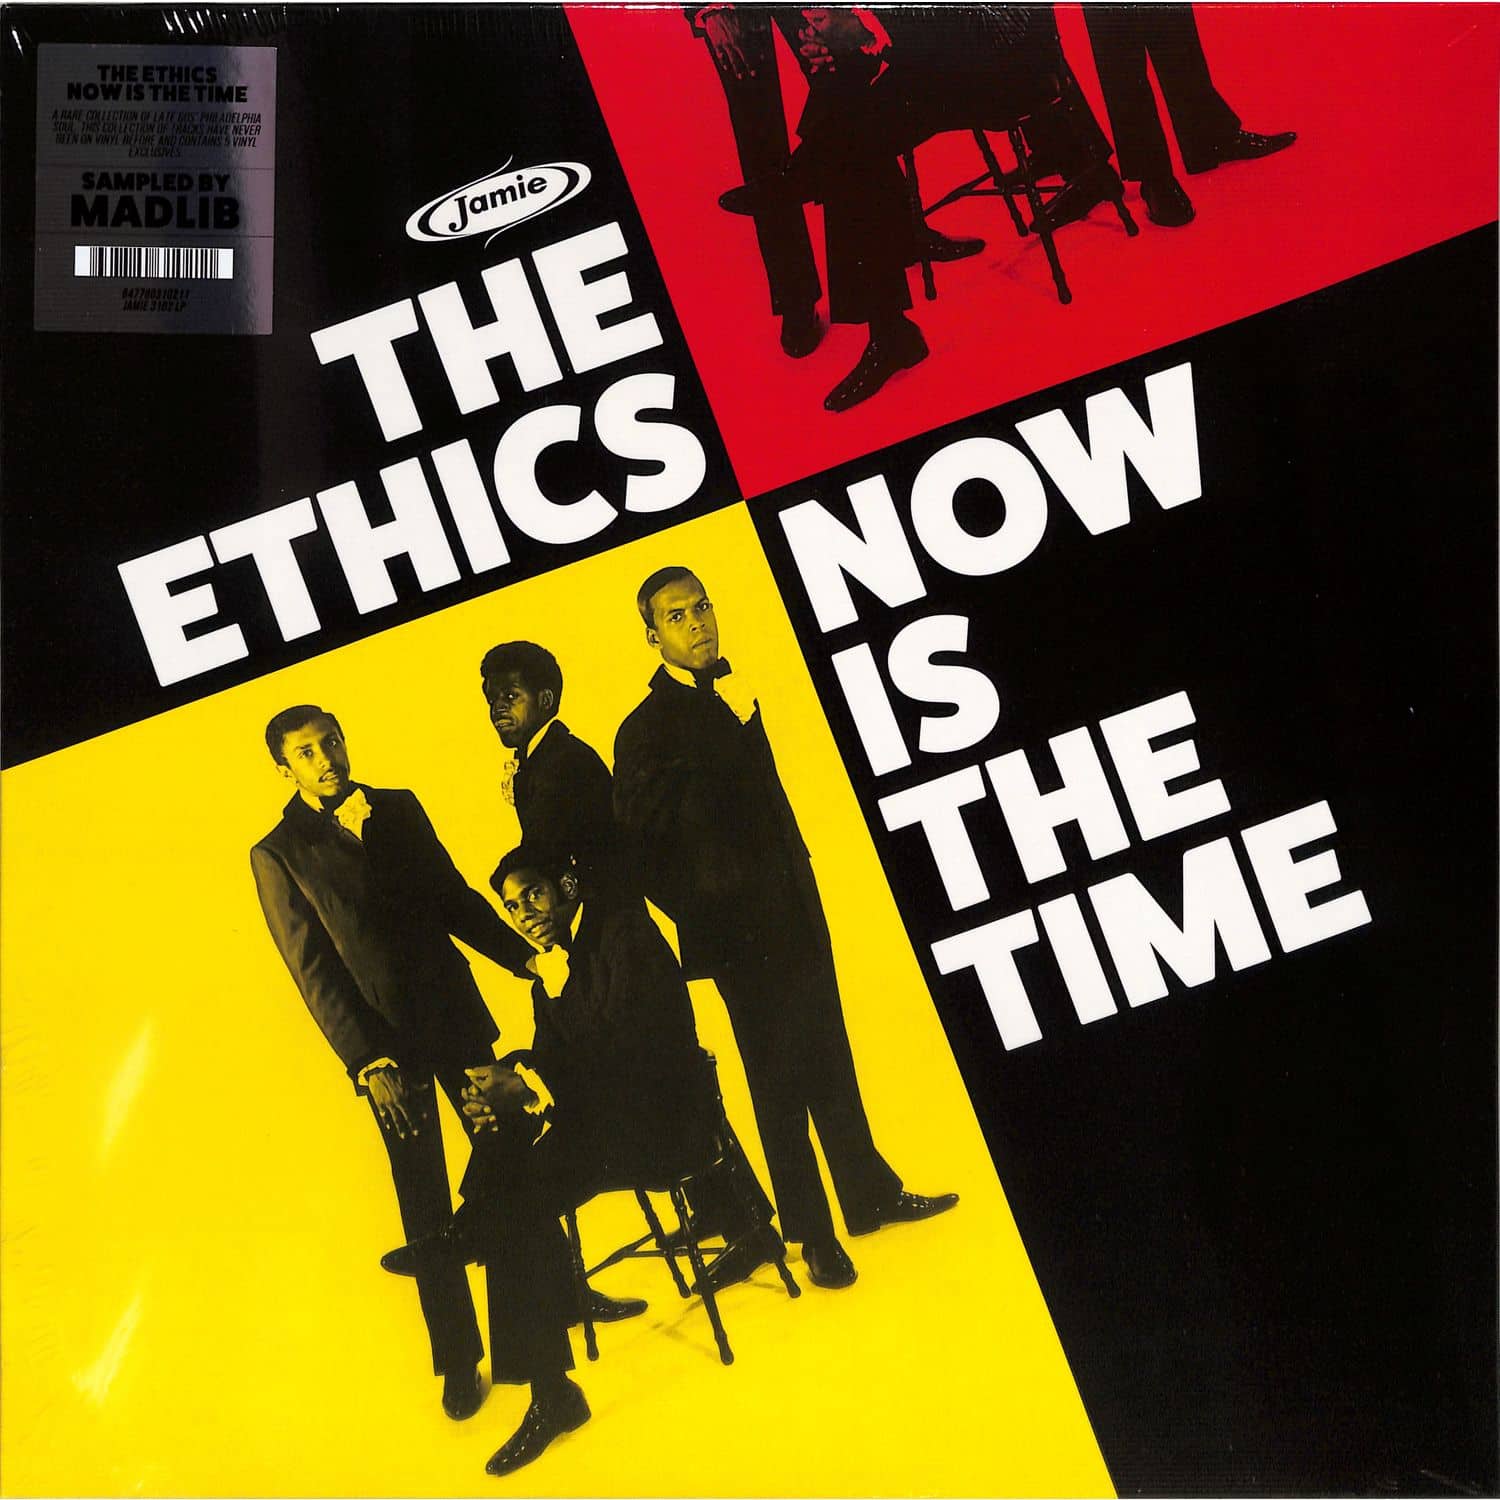 The Ethics - NOW IS THE TIME 